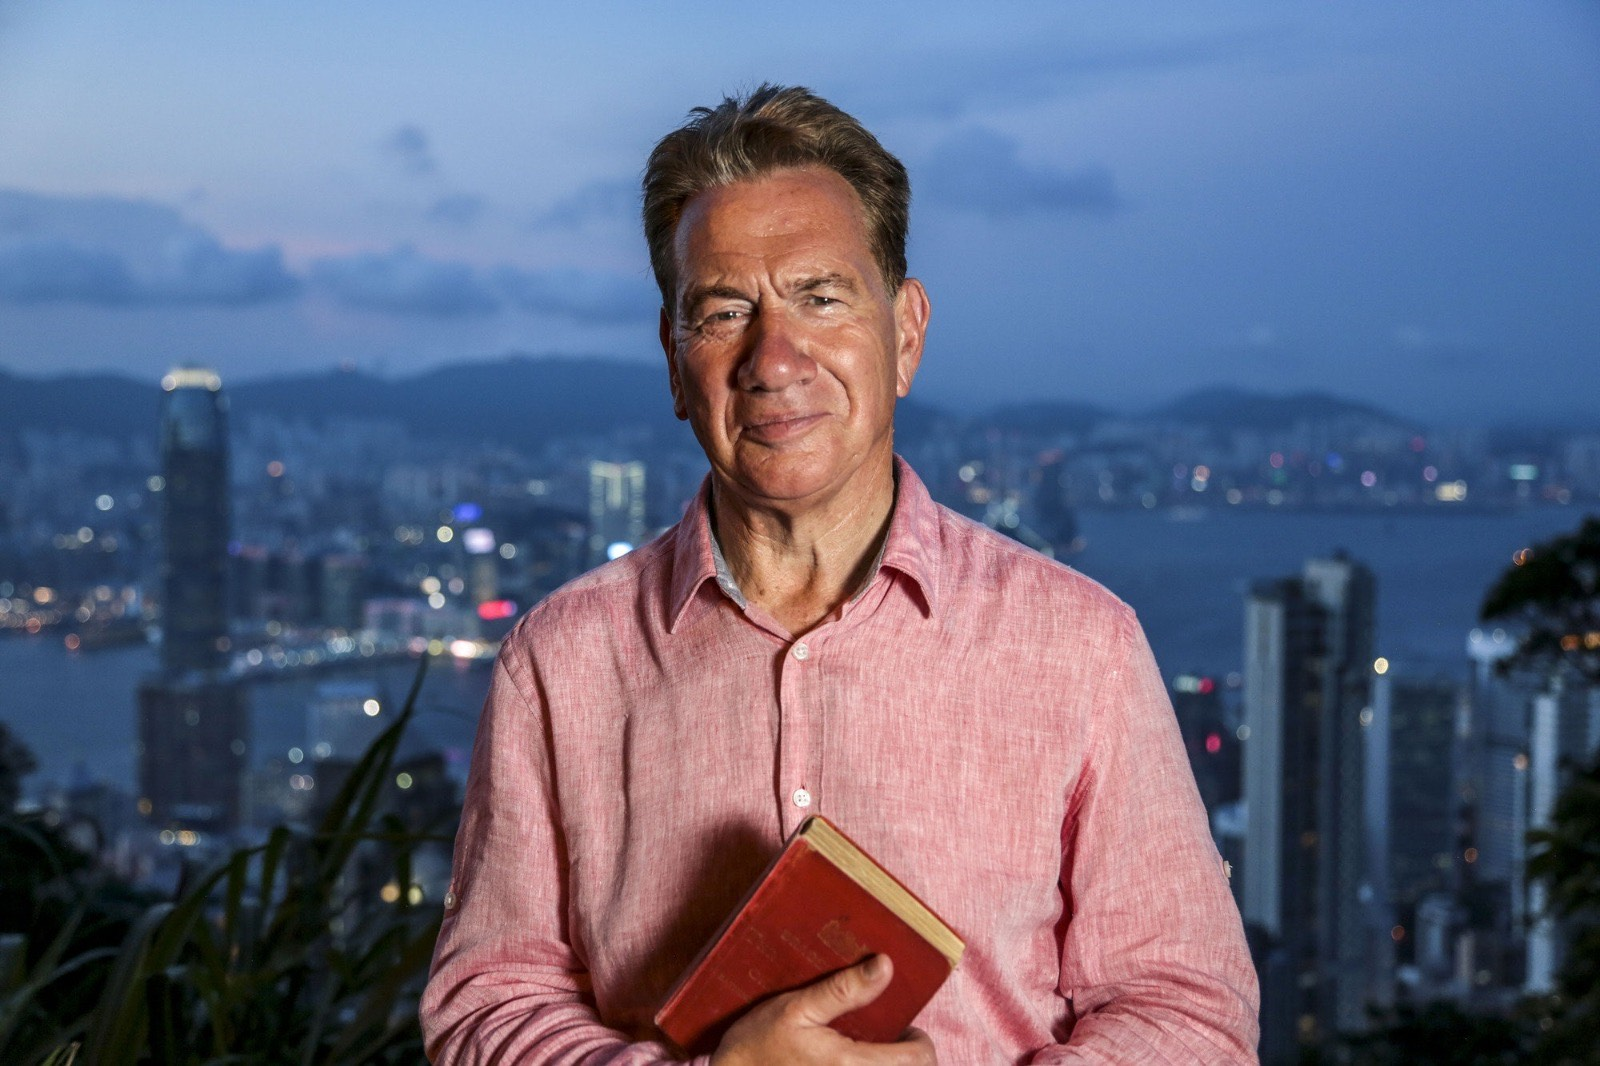 Weekends: Michael Portillo takes us on the BBC's Great Asian Railway Journeys